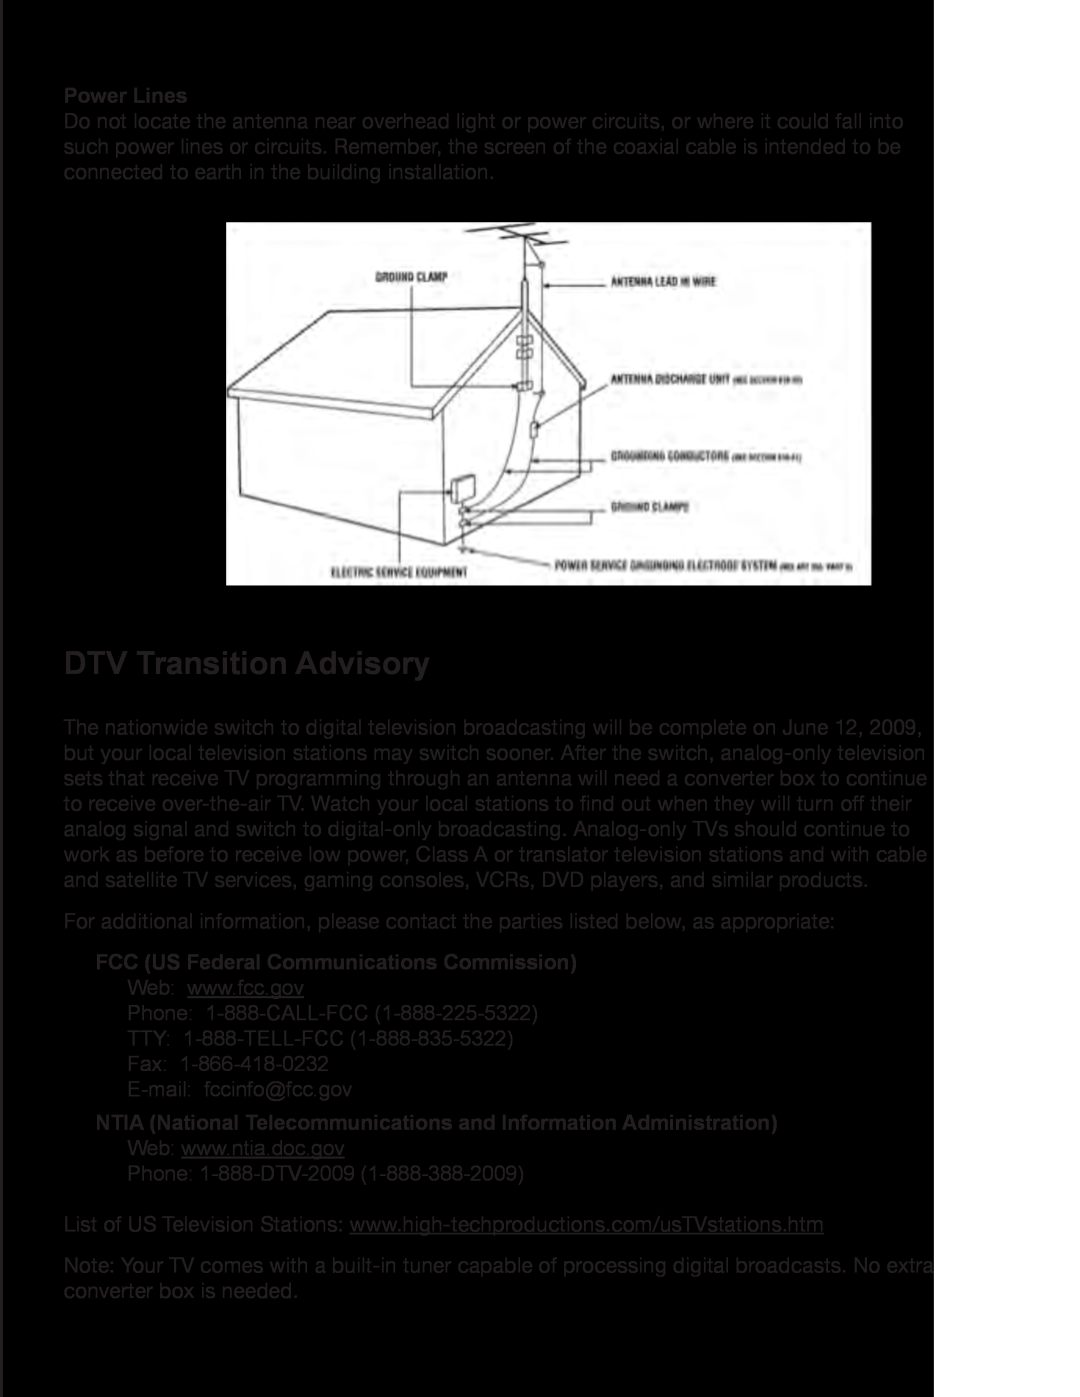 Zanussi VMB070 manual DTV Transition Advisory, Power Lines, FCC US Federal Communications Commission 